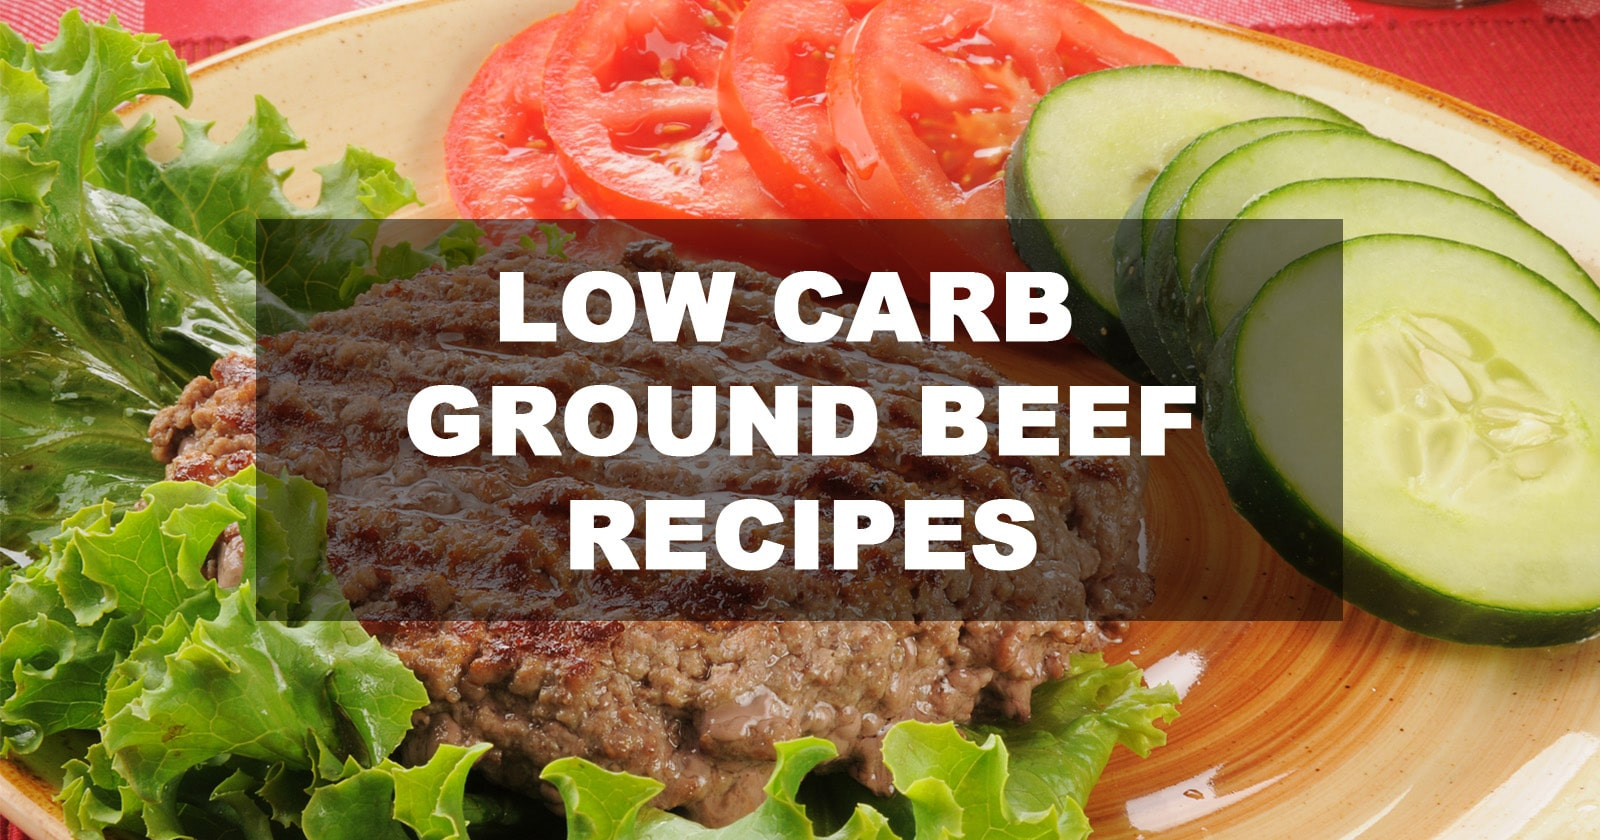 Low Fat Recipes With Ground Beef
 Best Low Carb Ground Beef Recipes October 2018